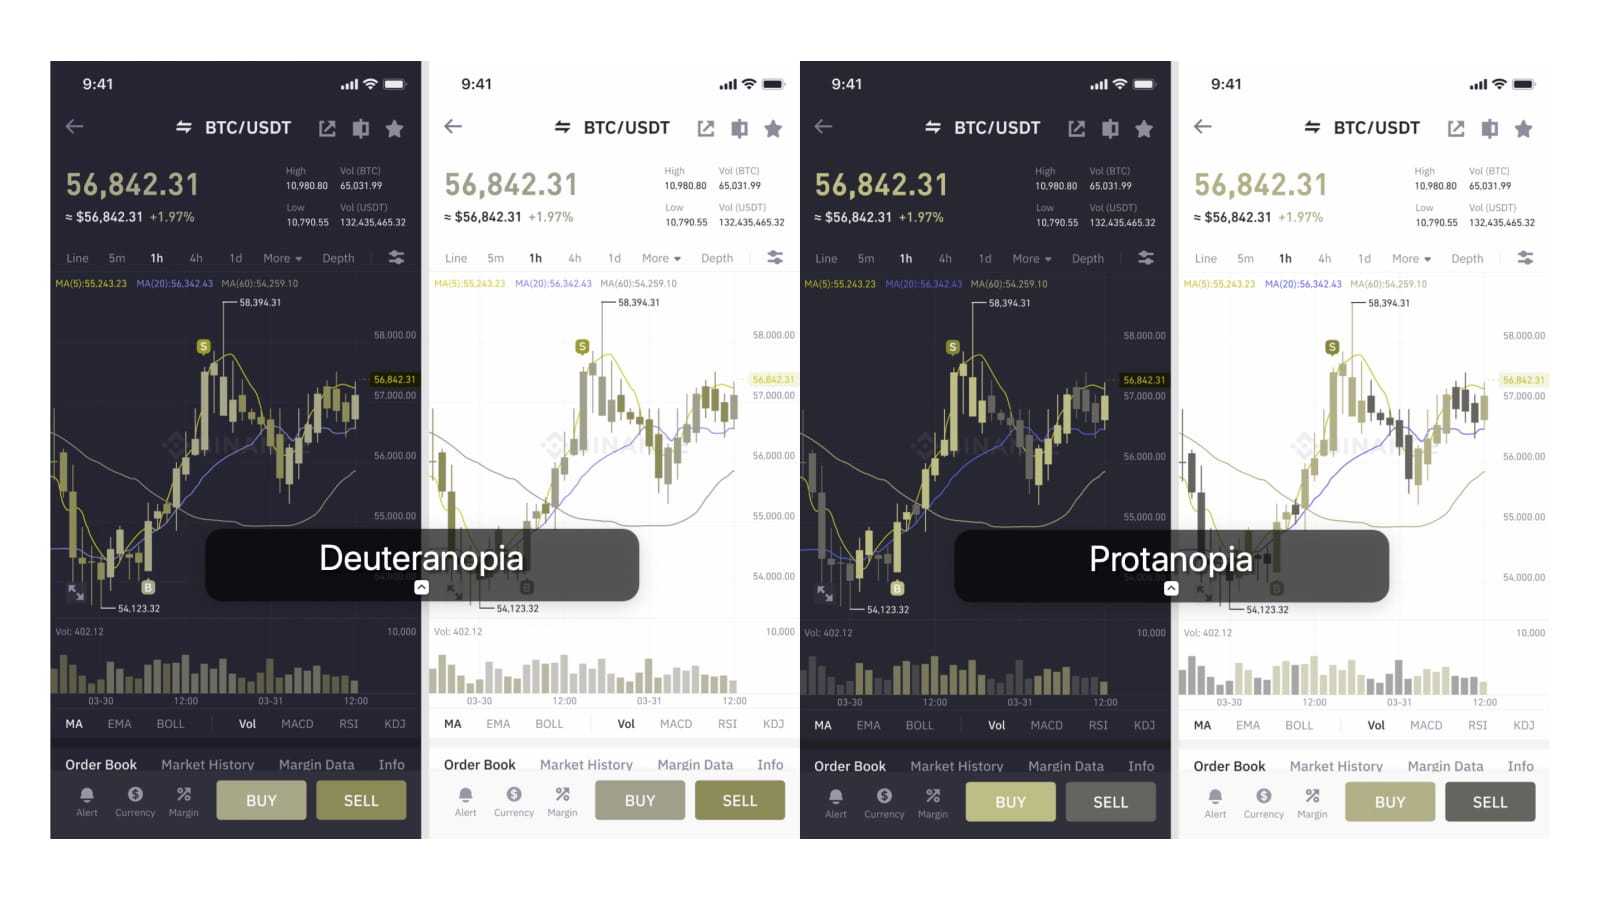 Binance adds support feature for people with color vision impairment